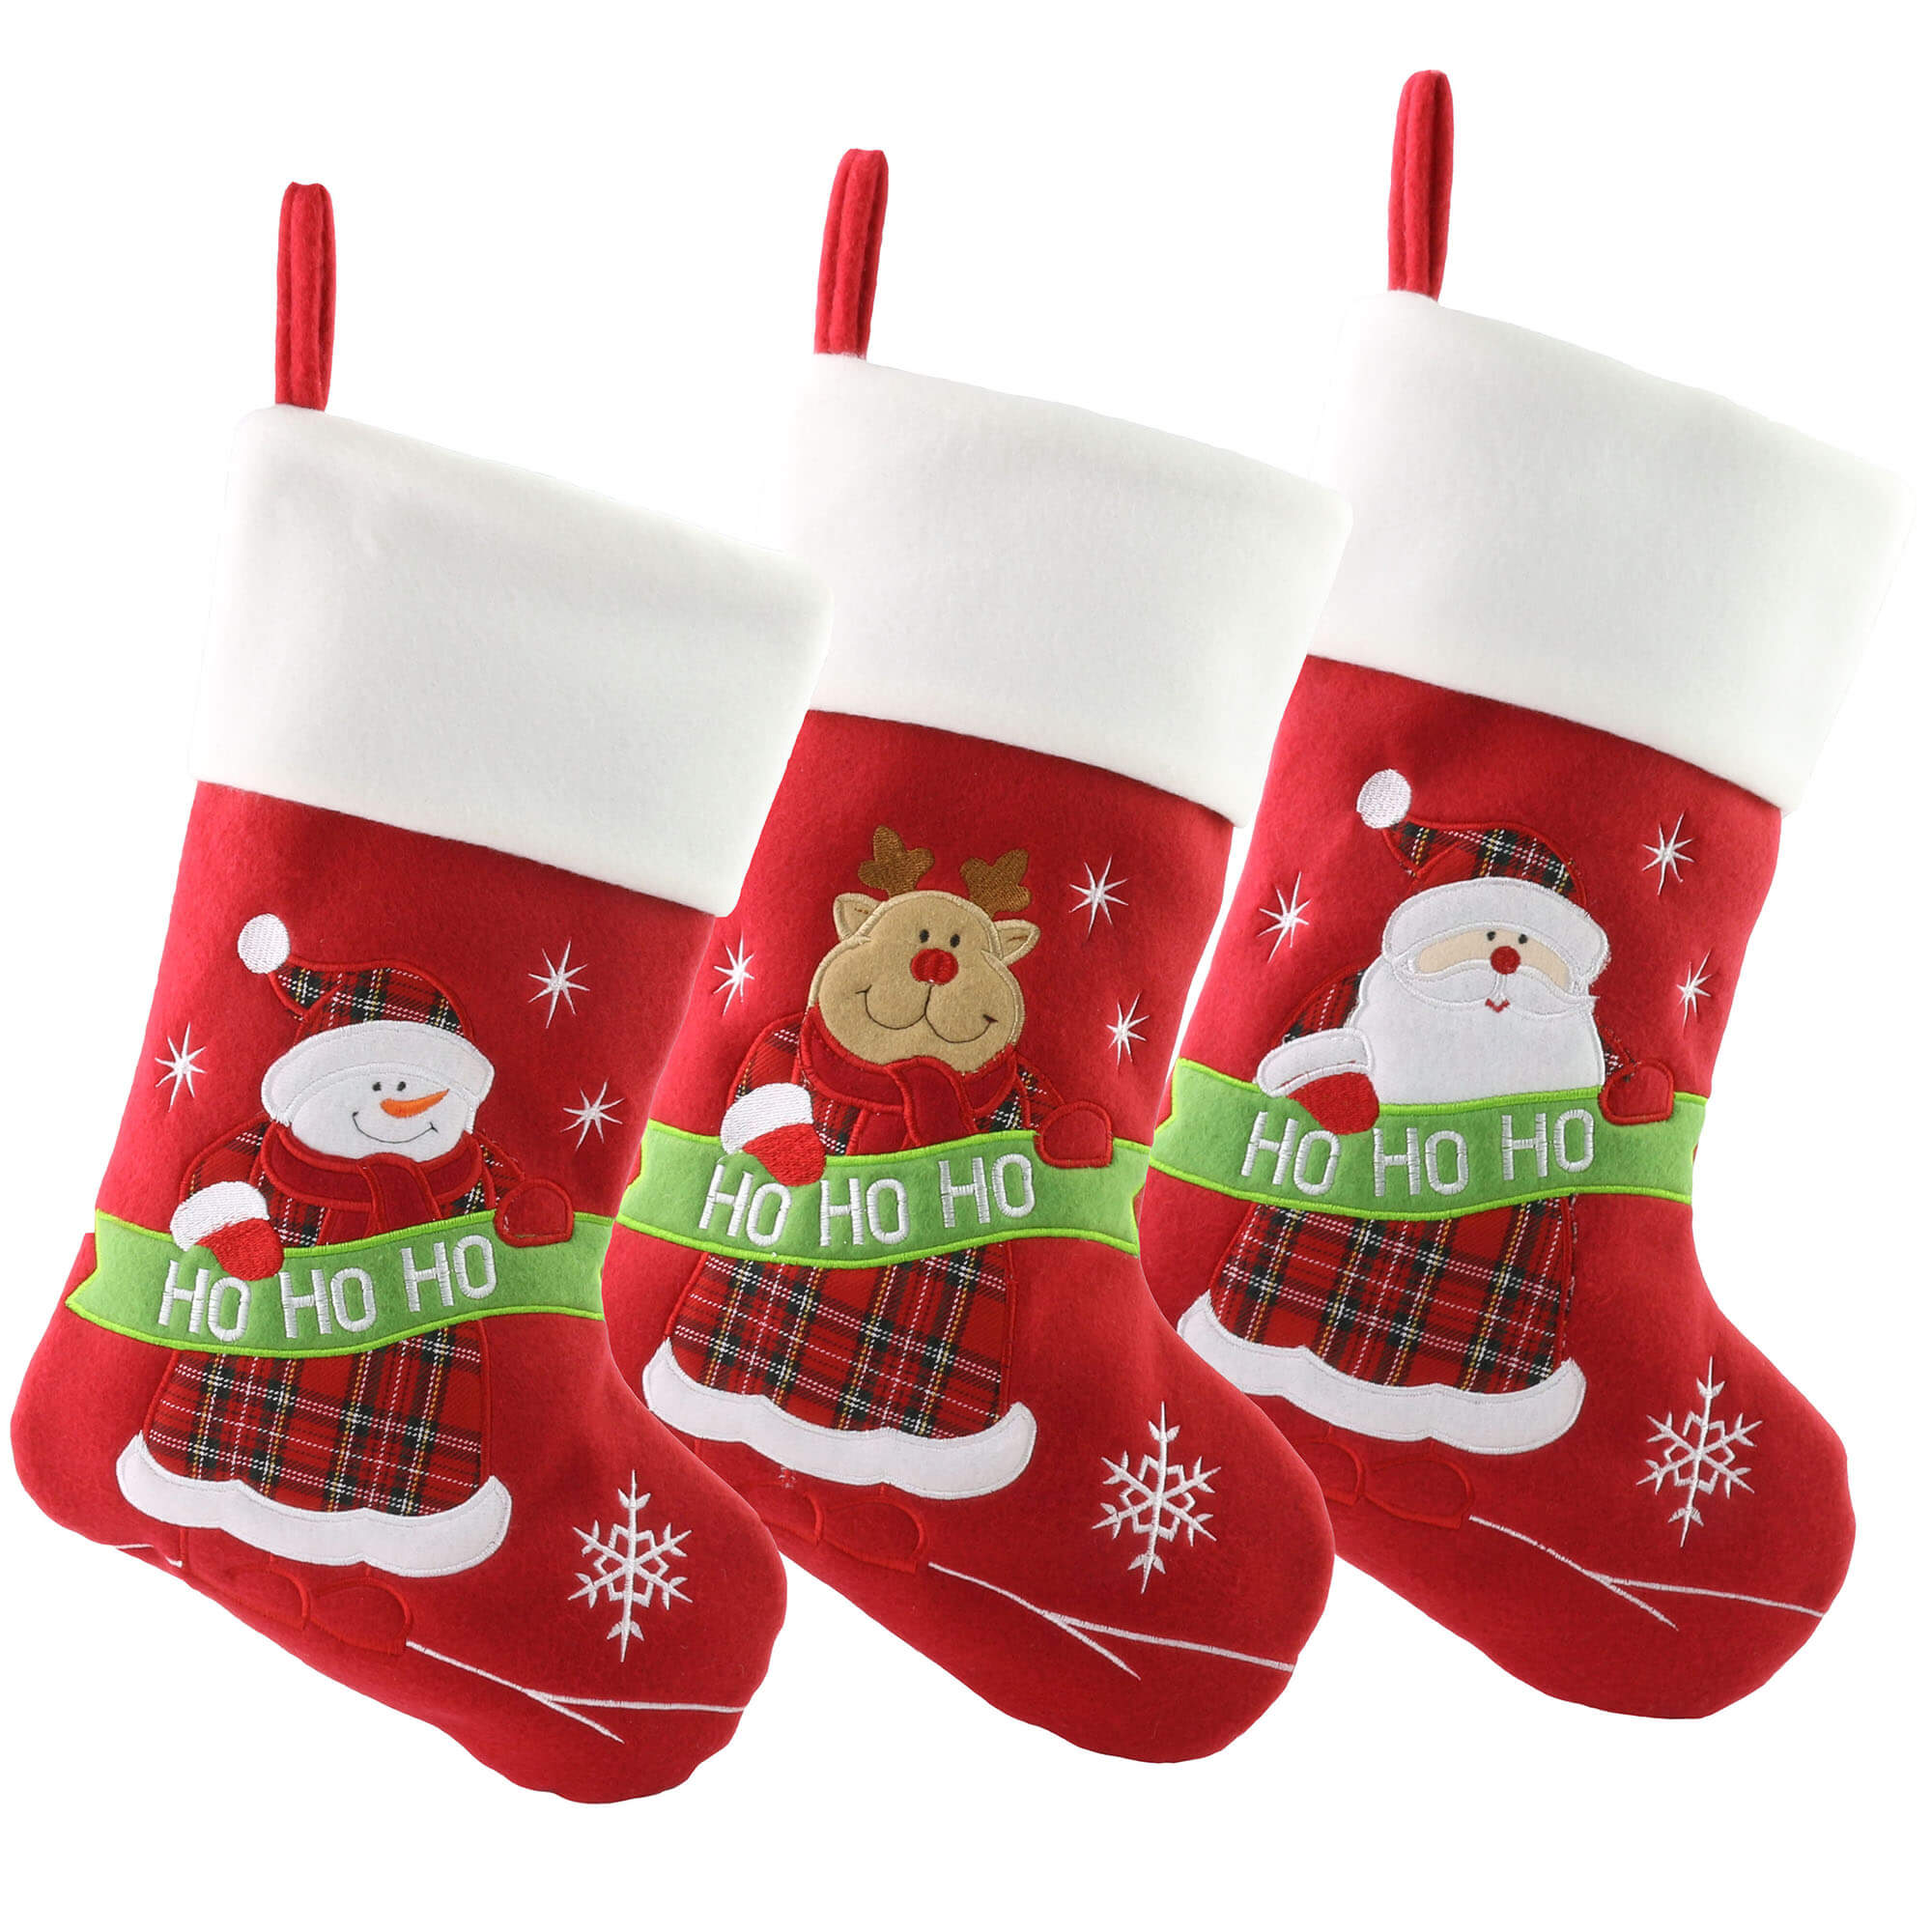 18'' Christmas stockings family set, 4 styles | Bstaofy - Glow Guards